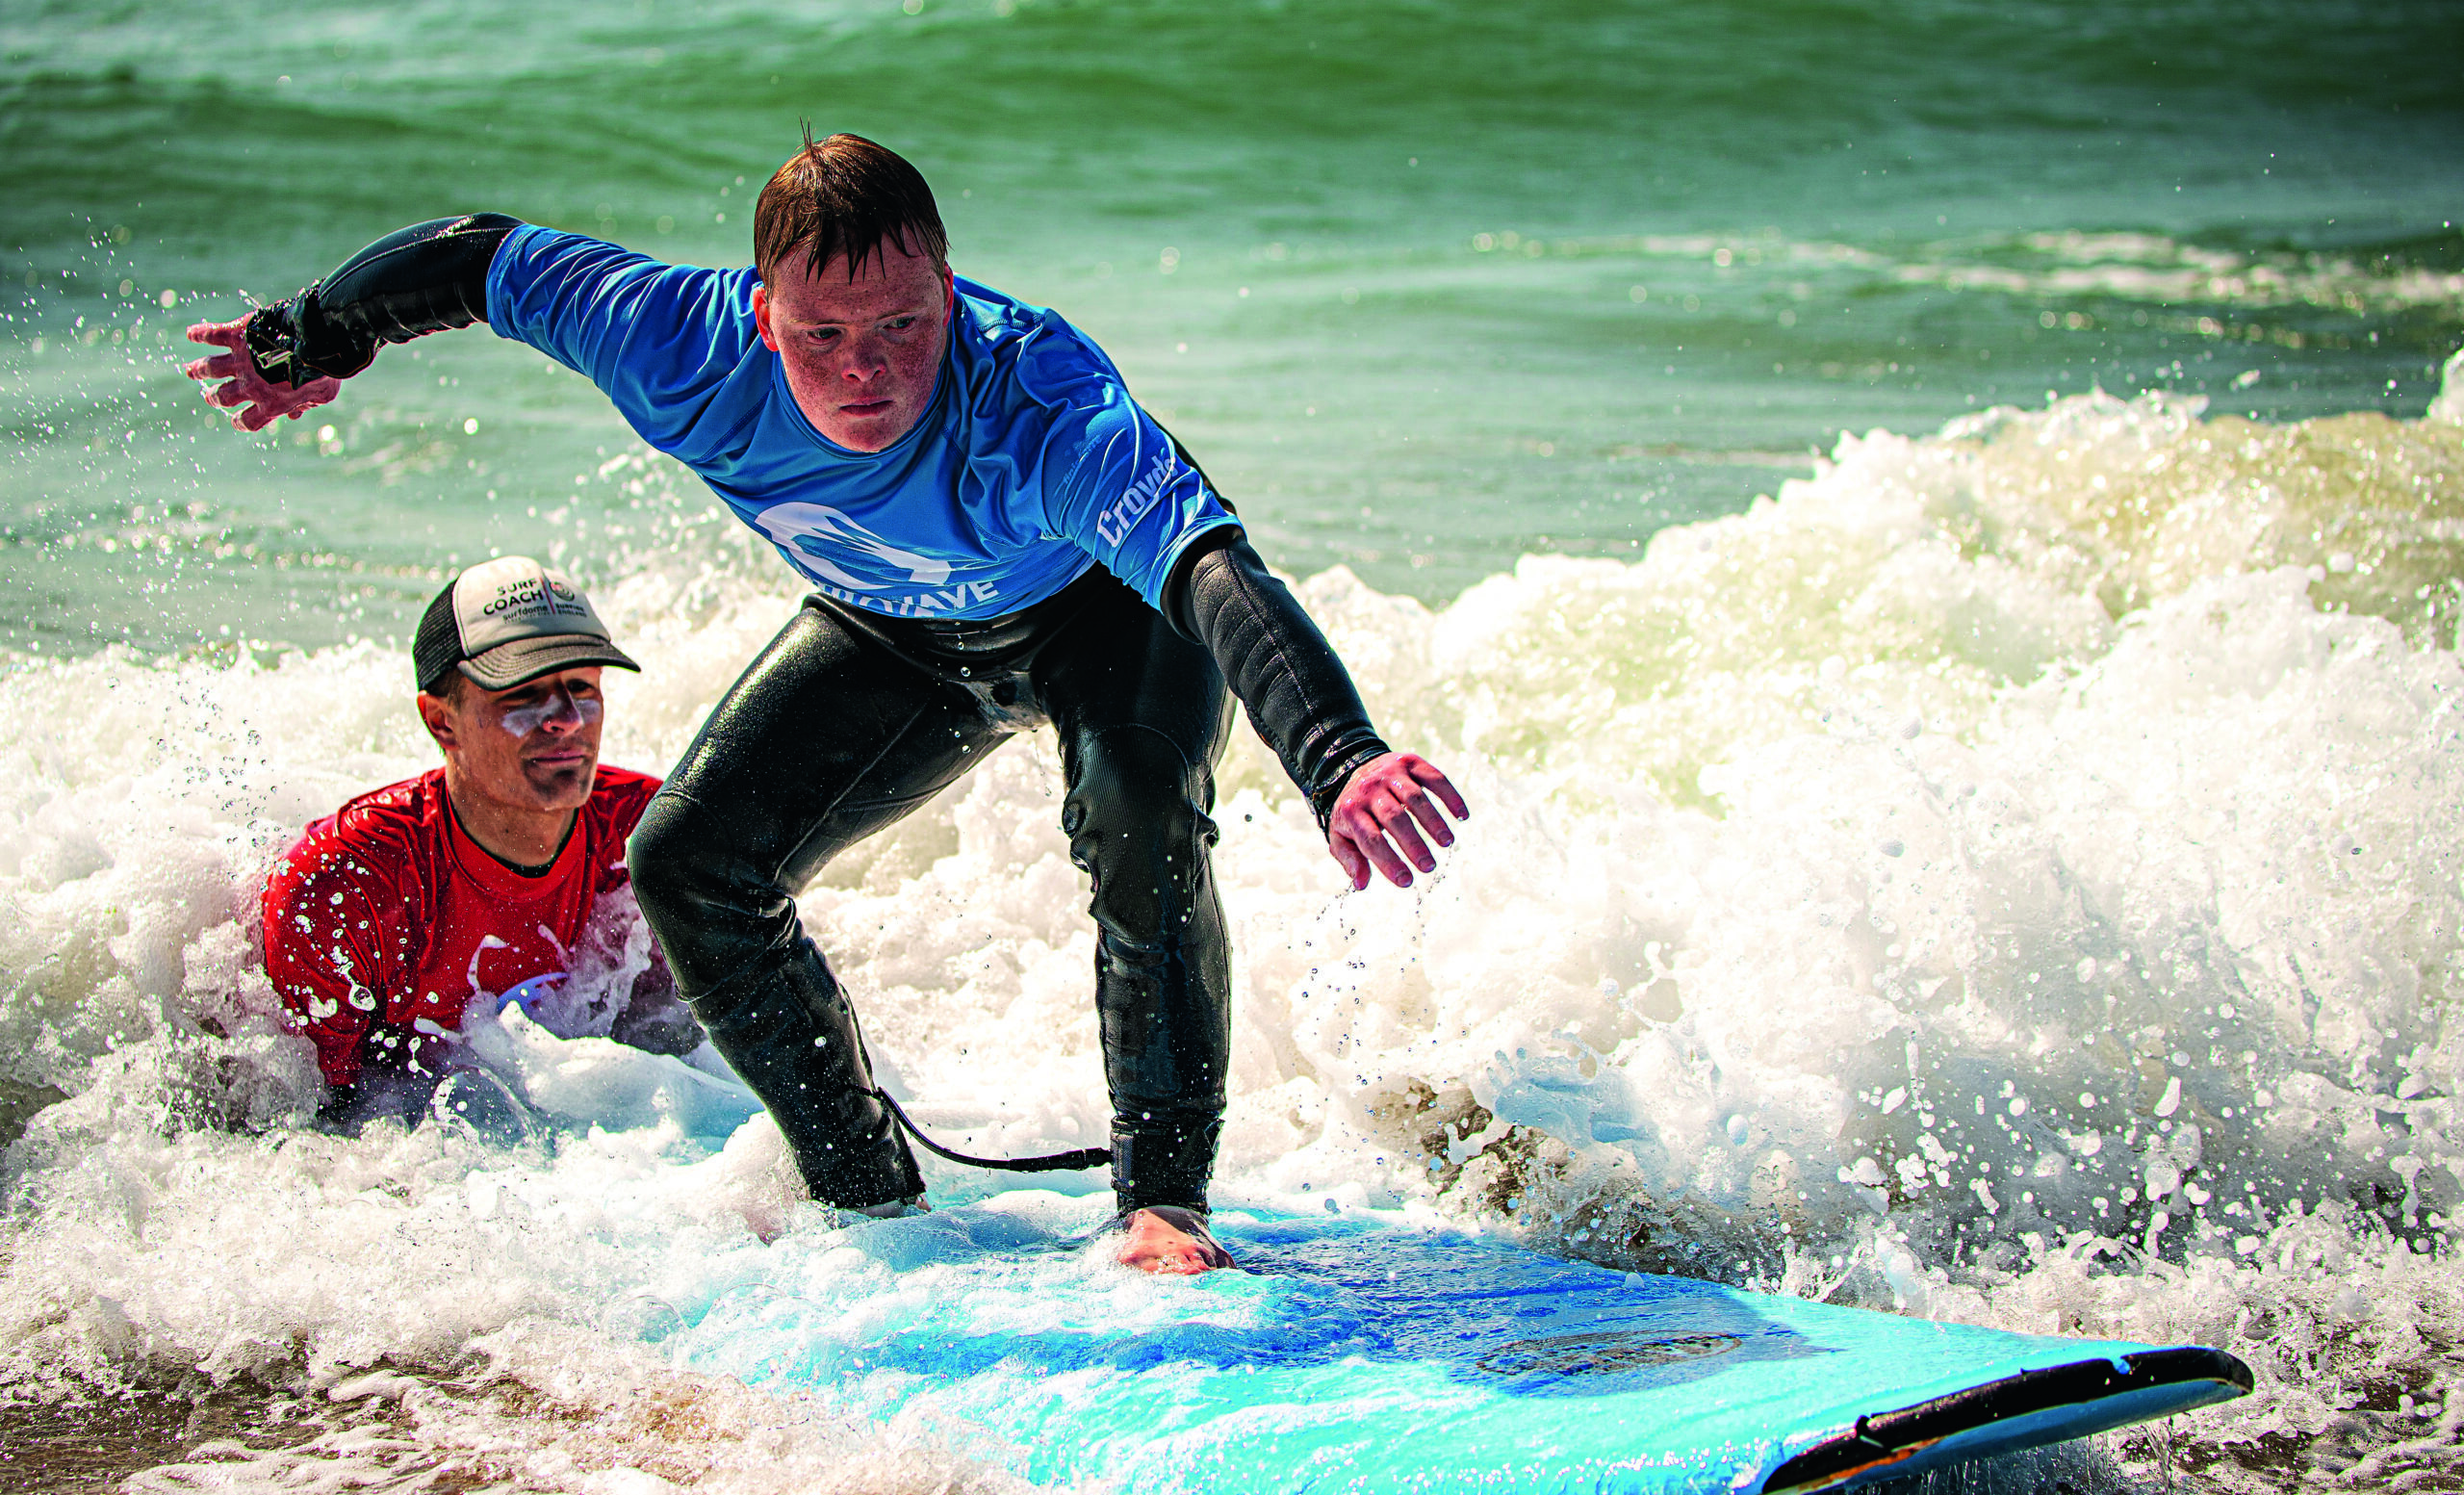 A surfer in action at The Wave Project’s adaptive surfing hub